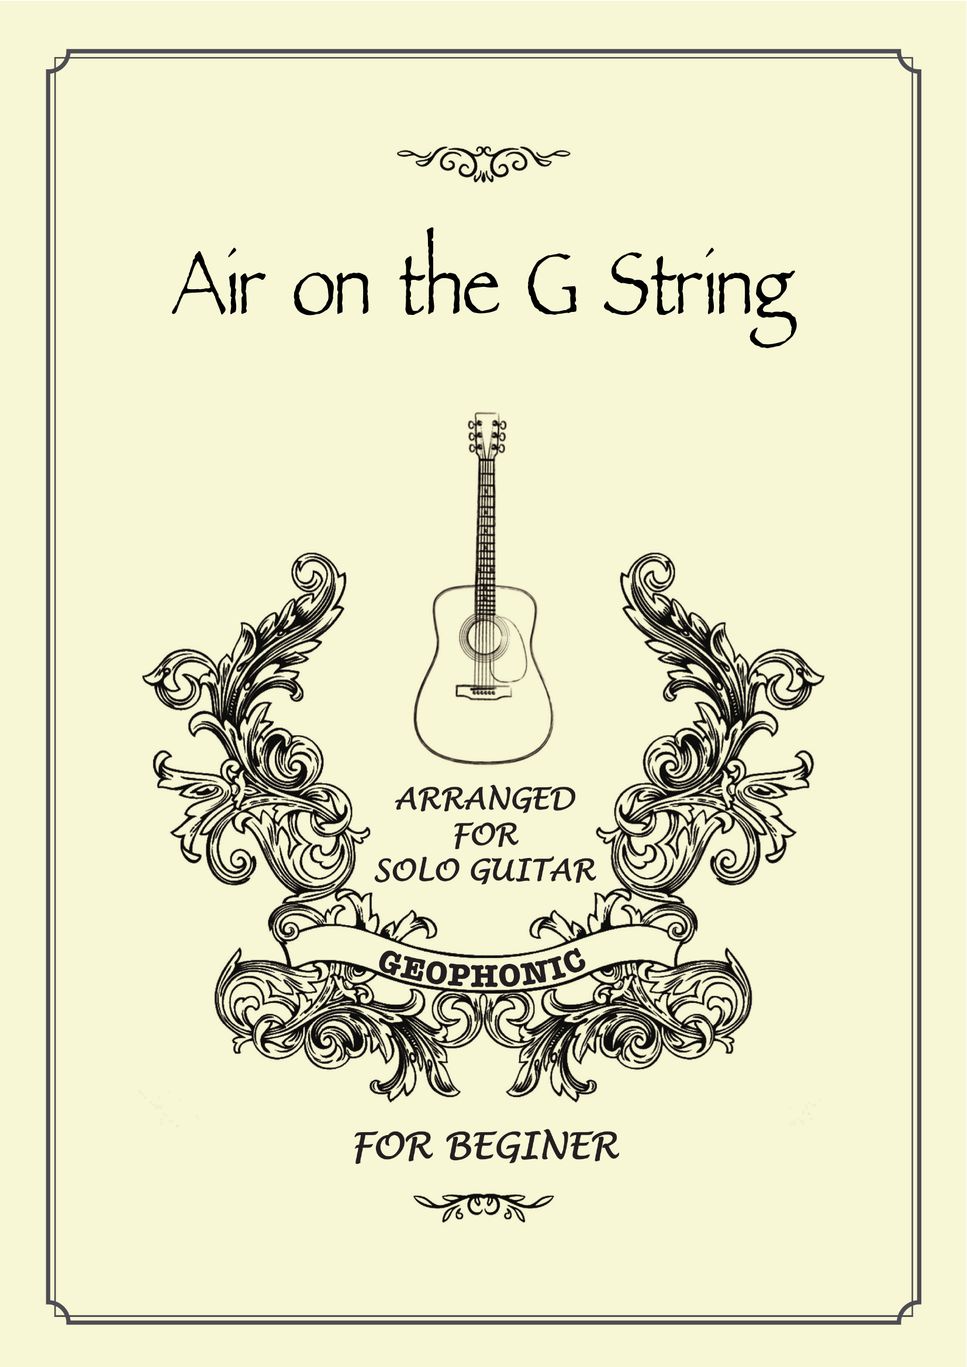 J.S. Bach - Air on the G String by GEOPHONIC